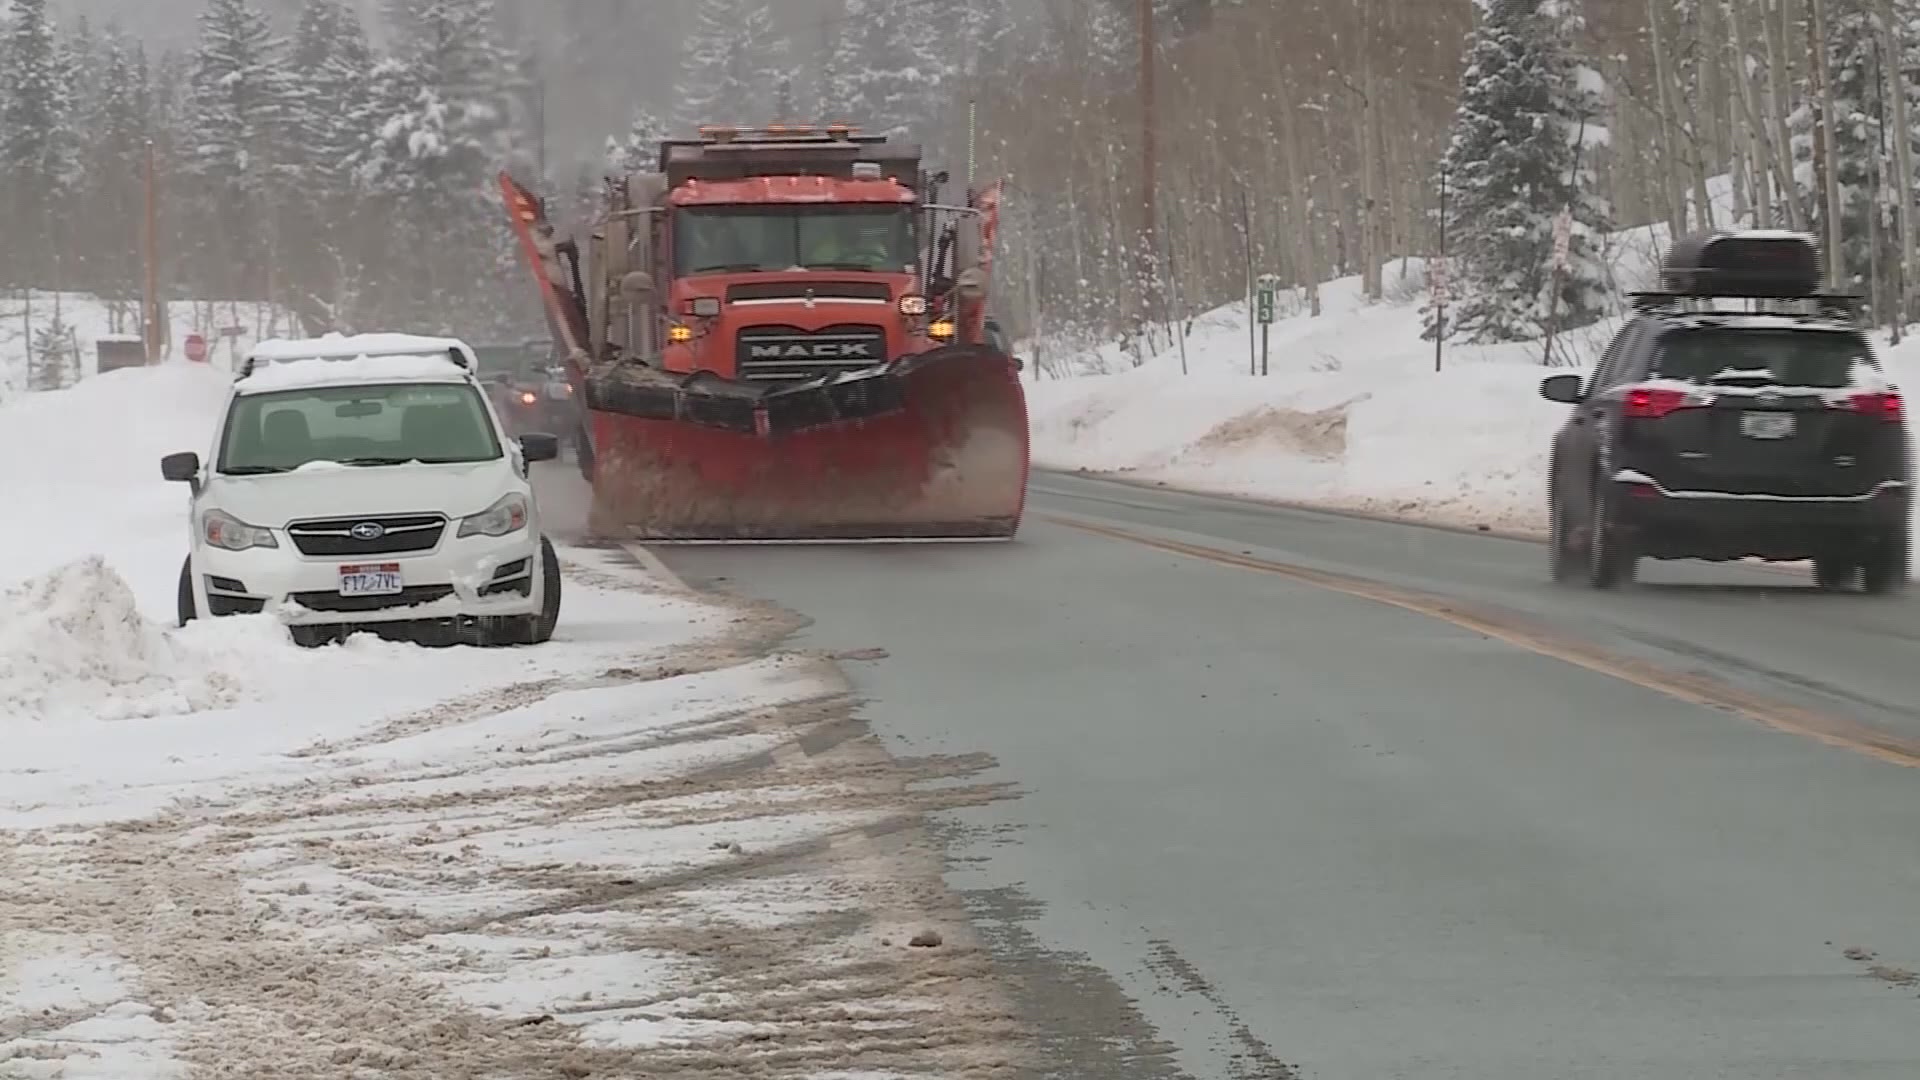 A snowplow removing snow from Big Cottonwood Canyon's roads with a car parked on the street....